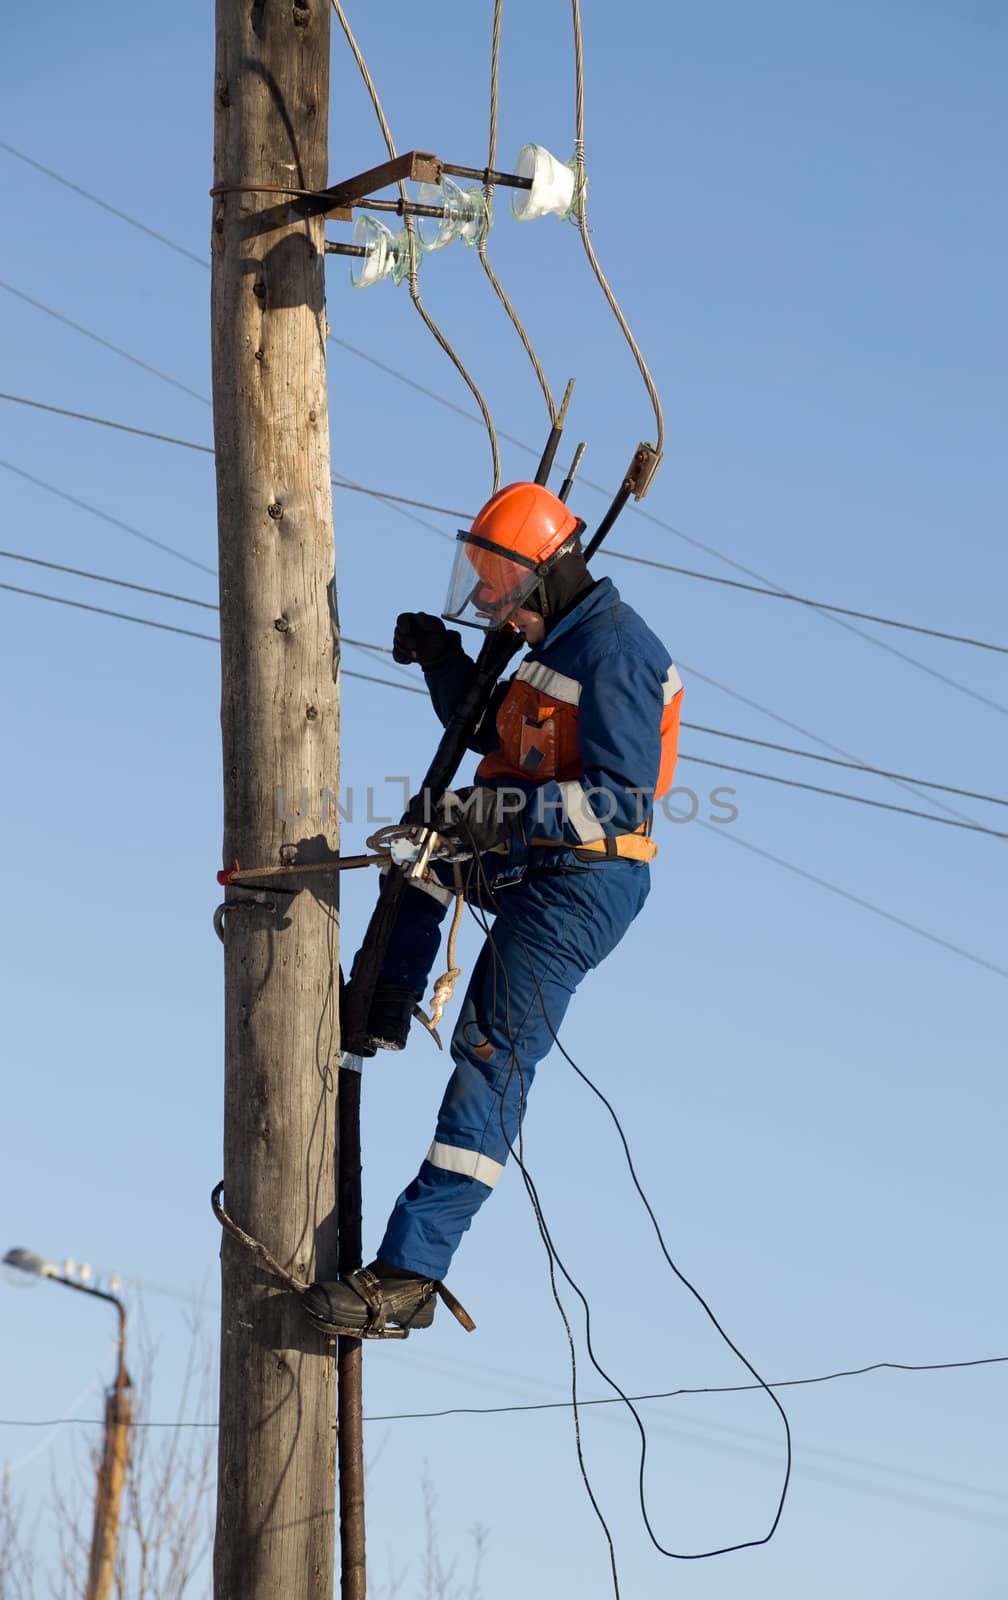 Electrician in blue overalls working at height with wires